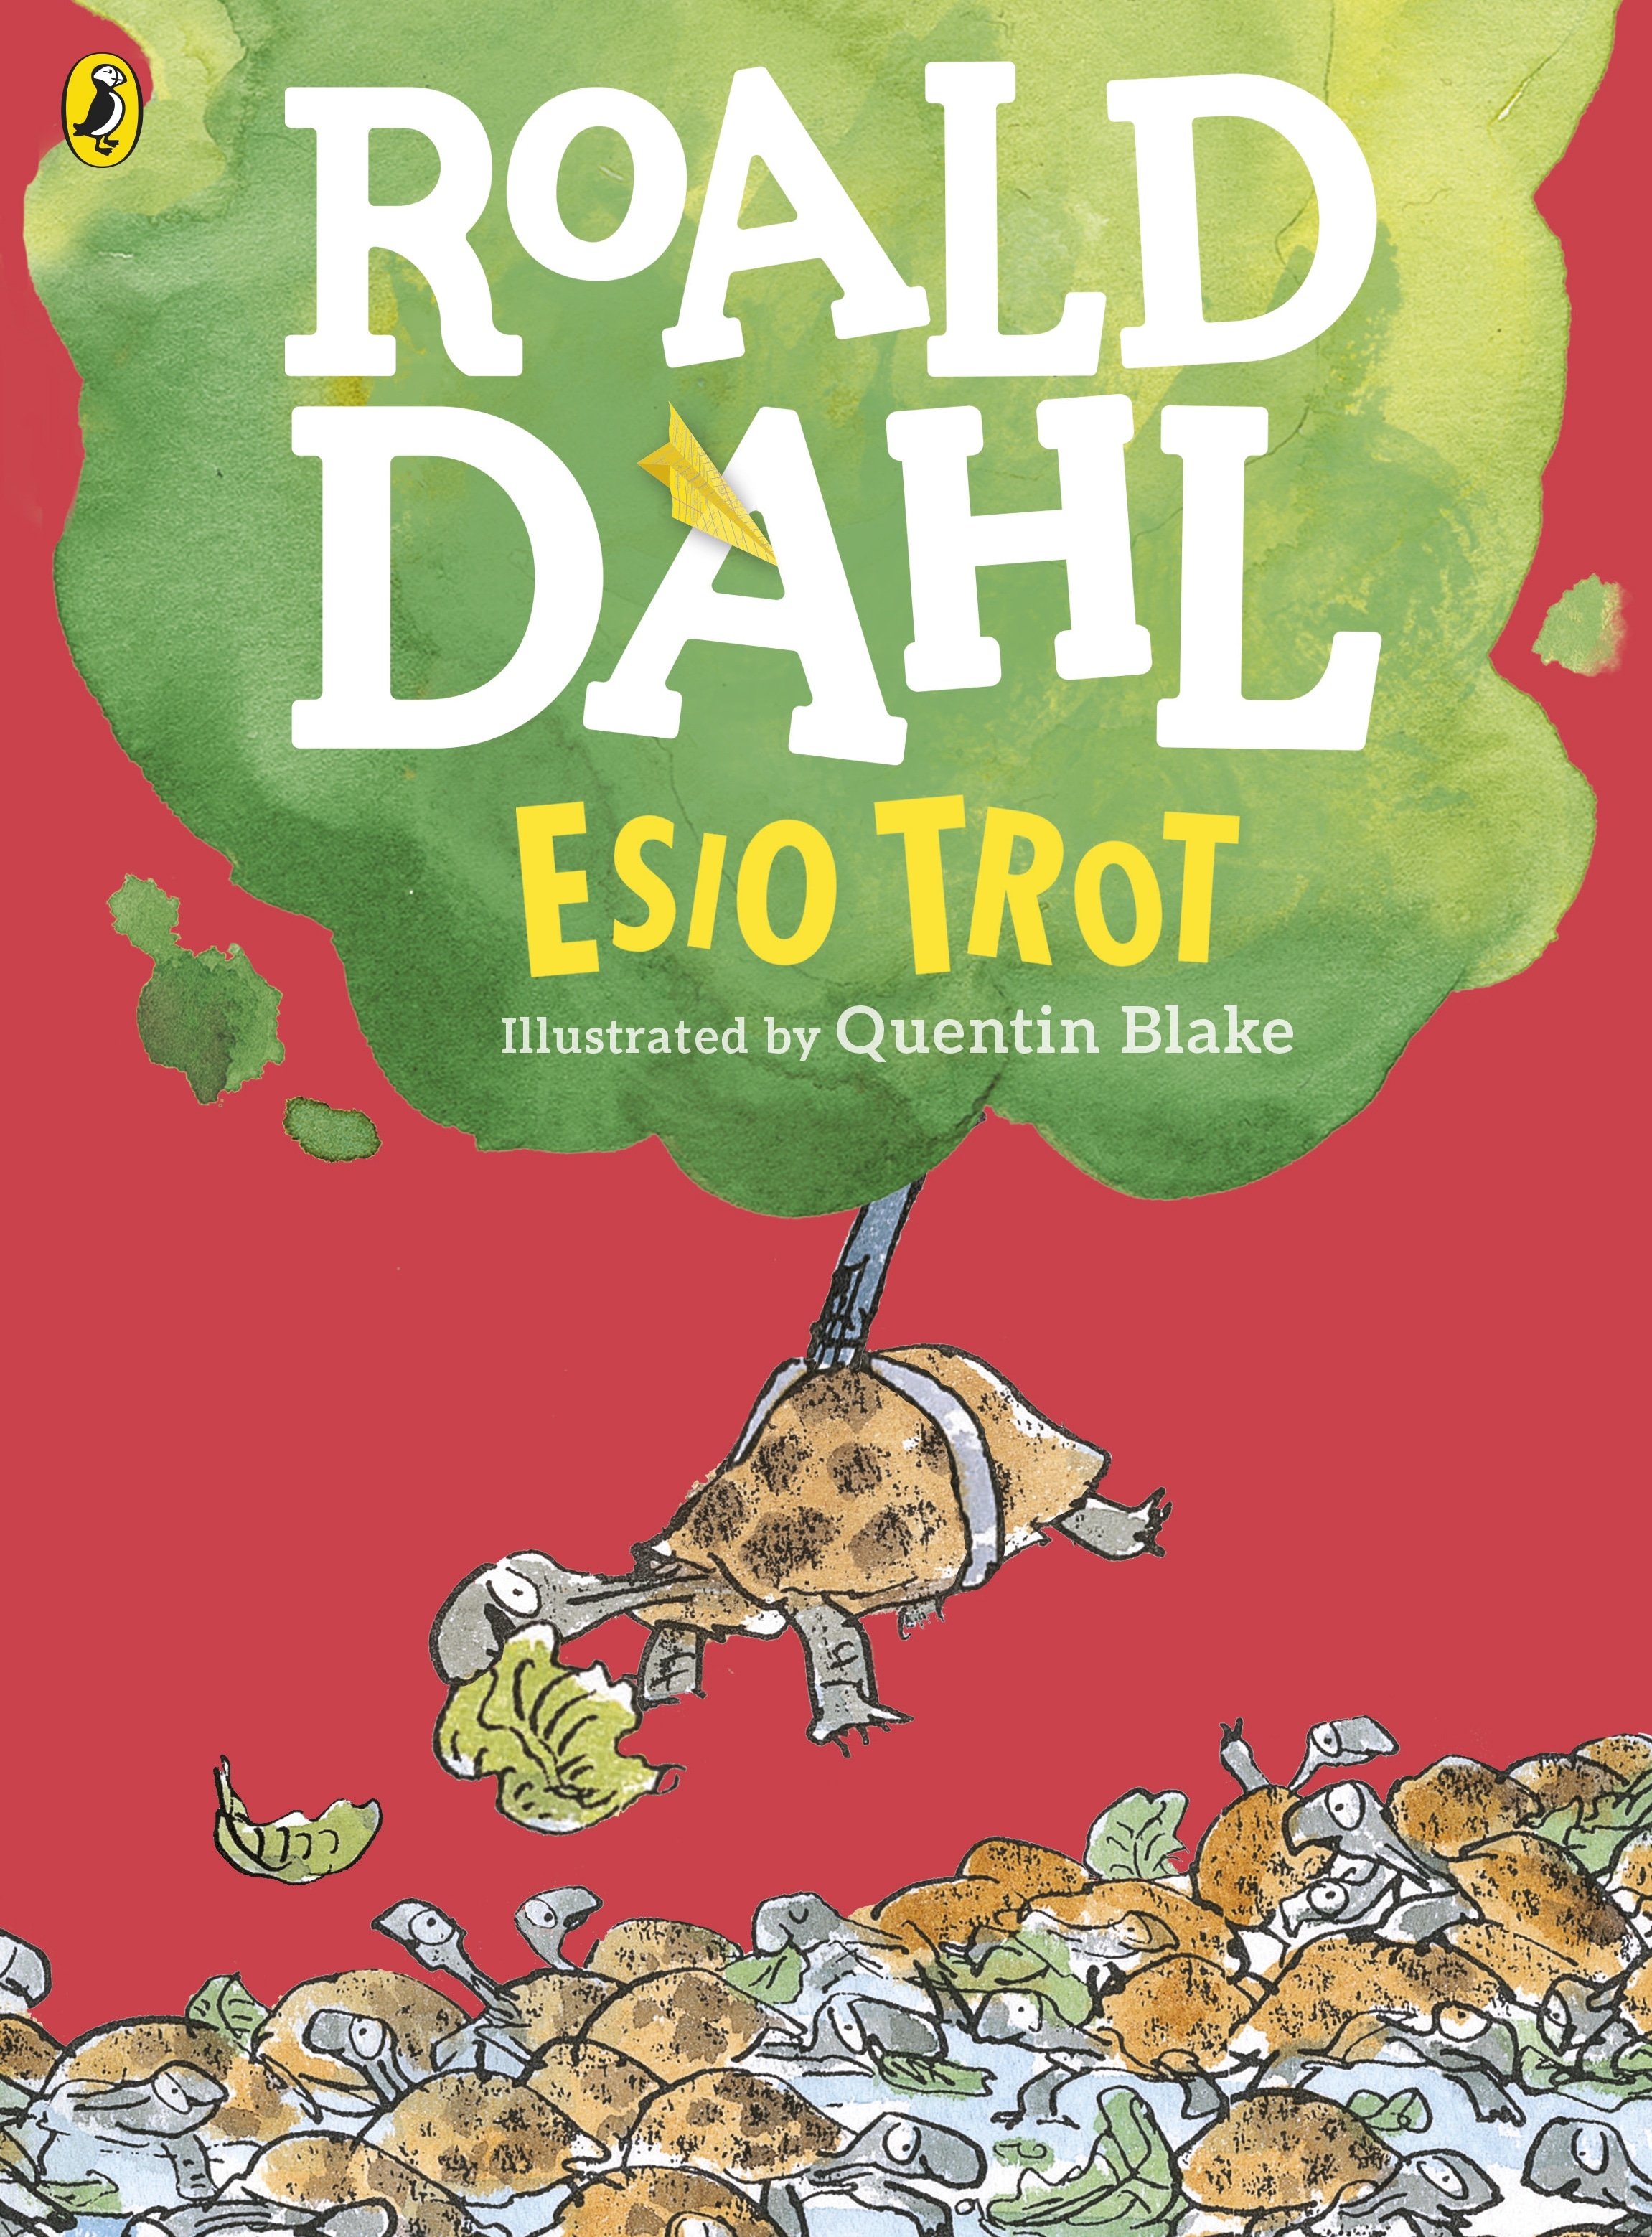 Book “Esio Trot (Colour Edition)” by Roald Dahl — October 6, 2016